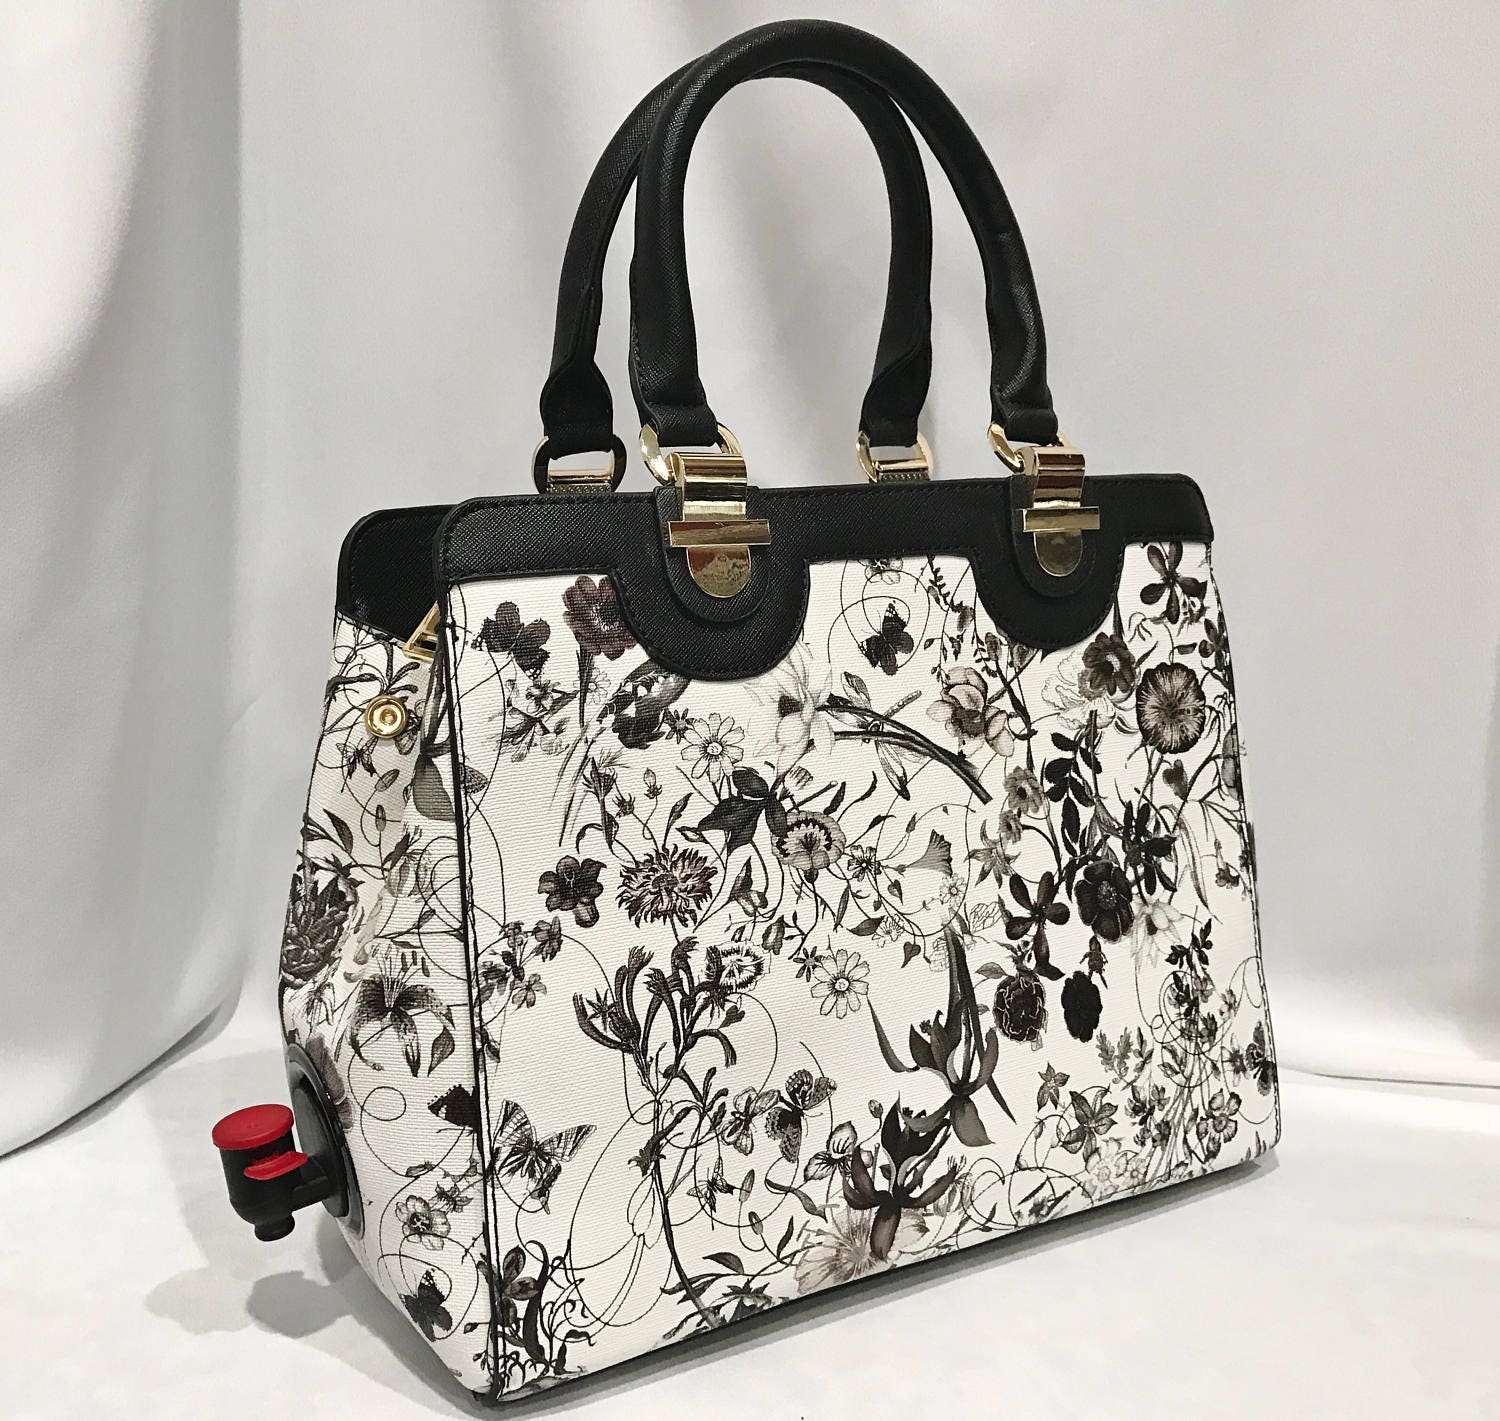 Charming Wine Purse with Dispenser Black & White Floral